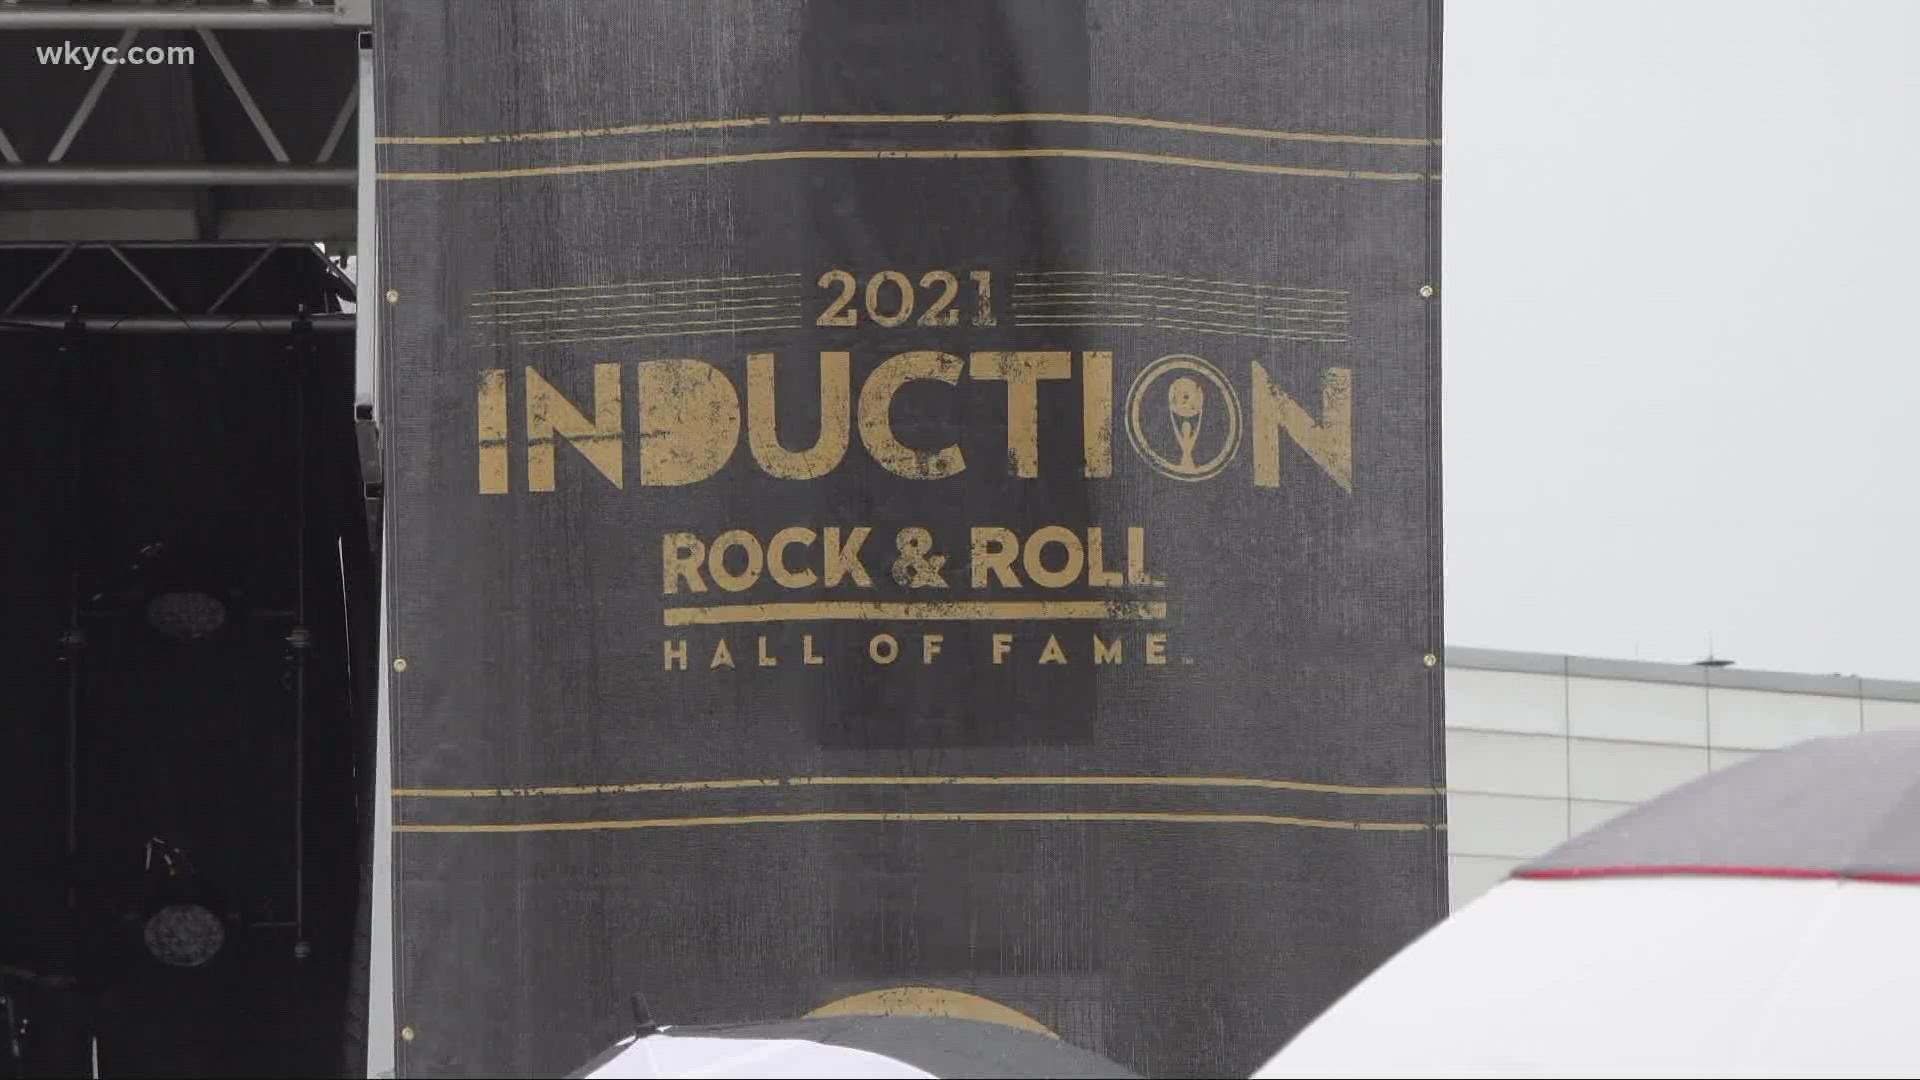 The Rock and Roll induction ceremony takes place this weekend in Cleveland.